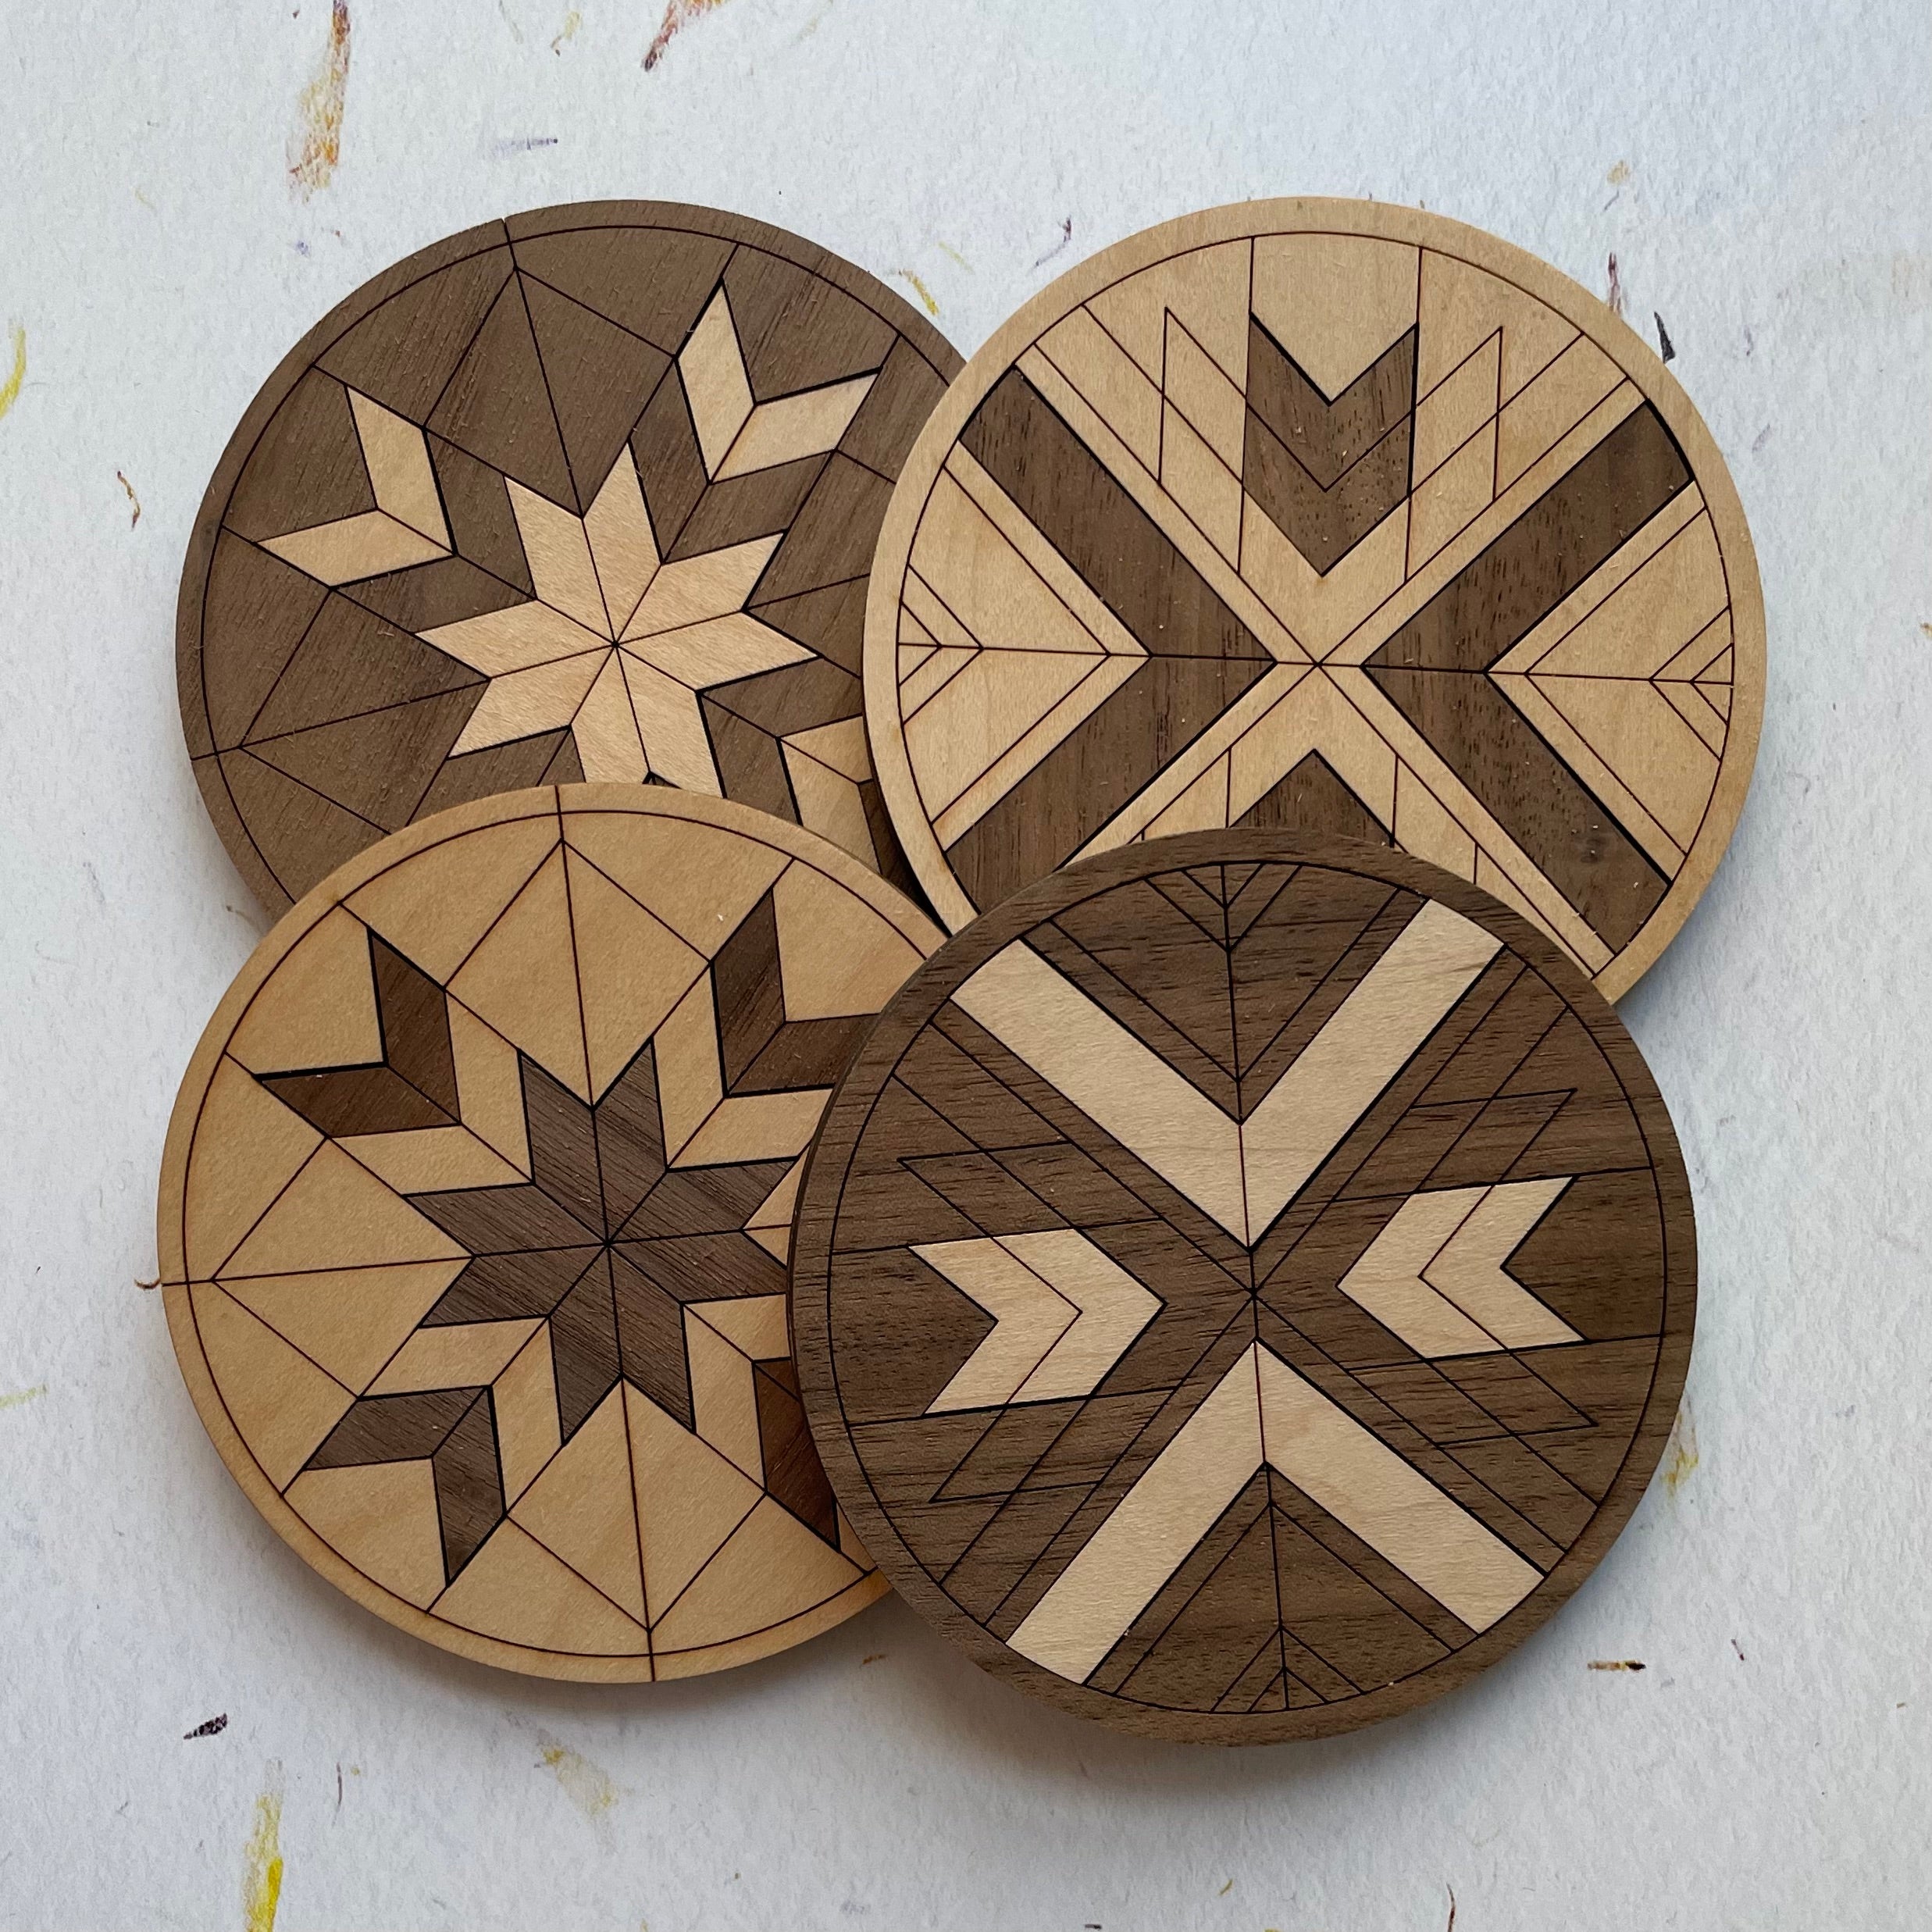 Wooden Coasters for Drinks - Laser Cut Wood Coasters